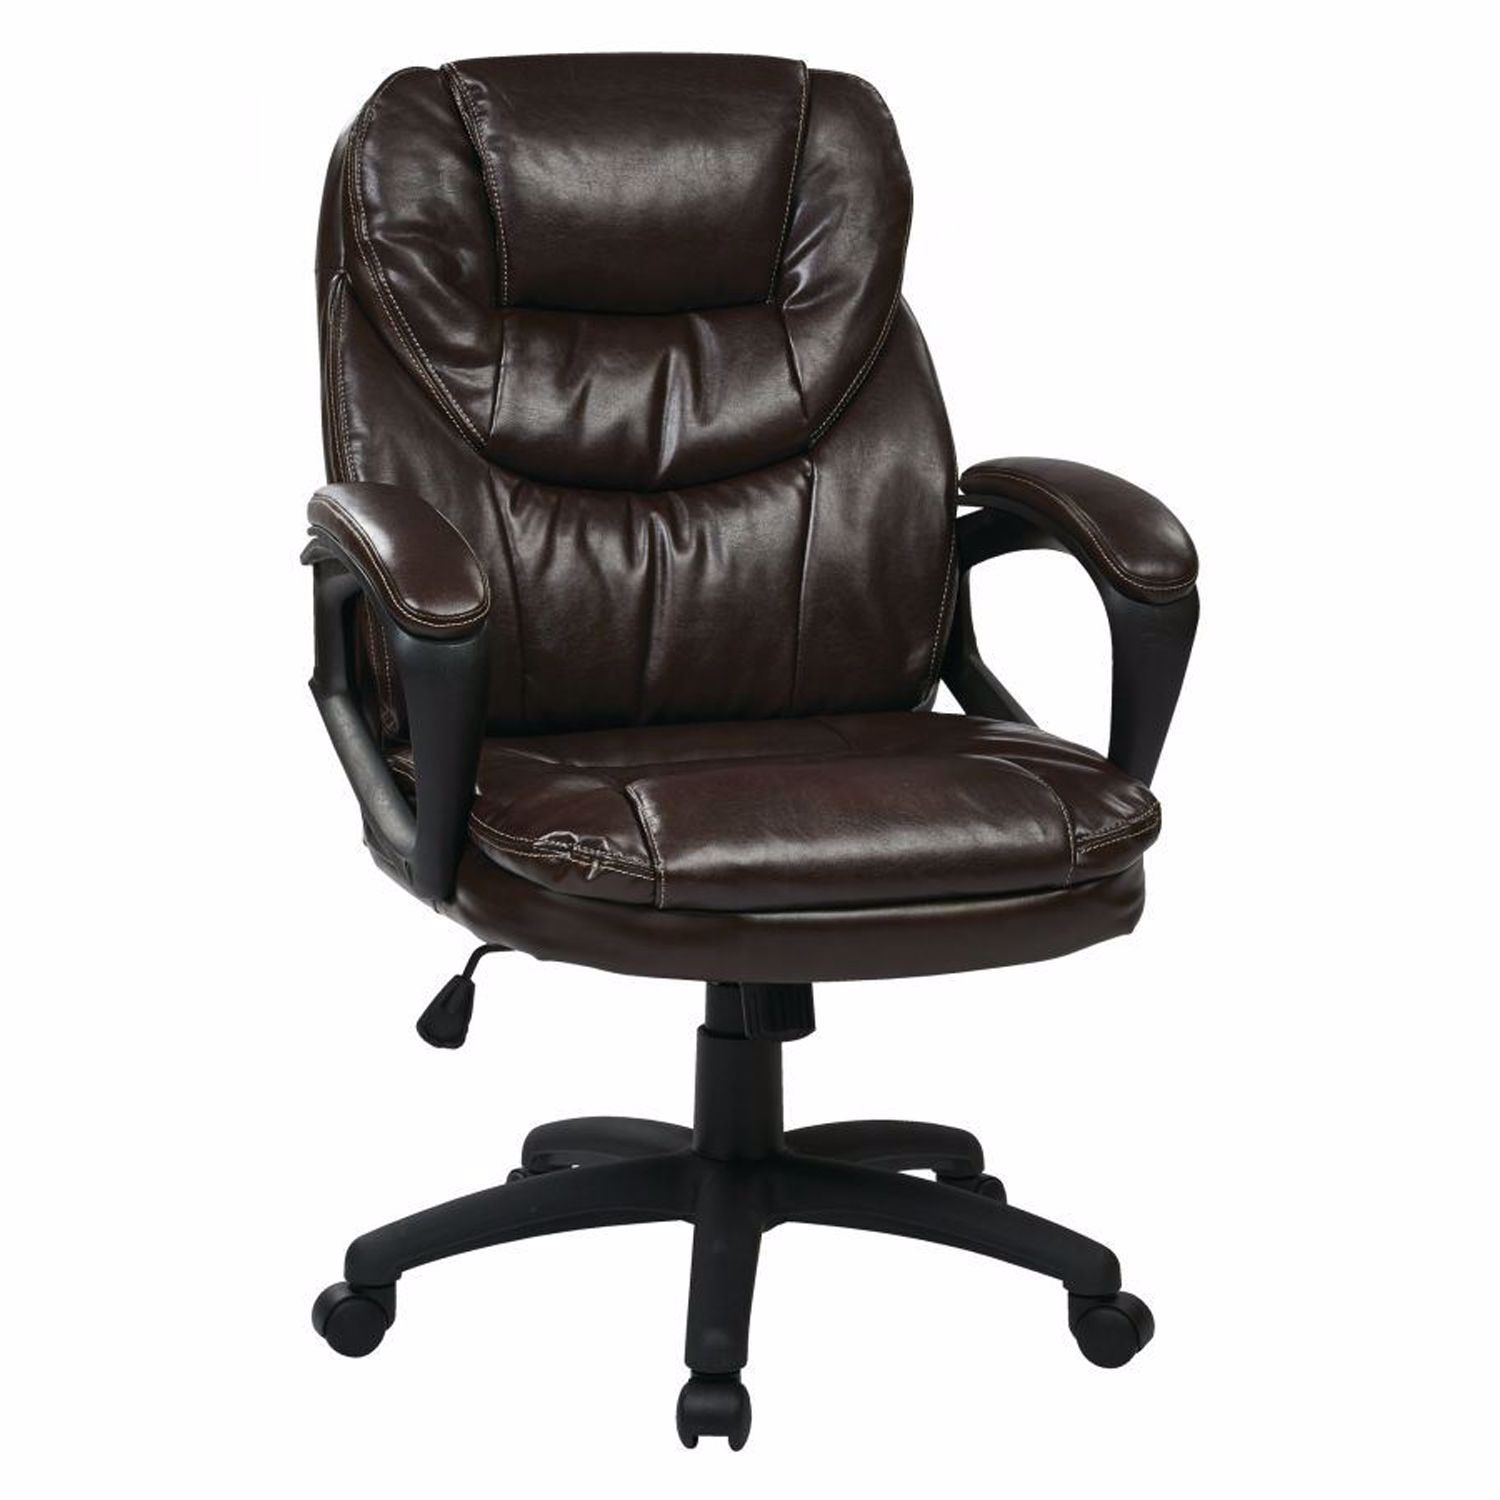 Comfty Lumbar Support and Chrome Base Leather Office Chair, 37.6, 41.53, Black